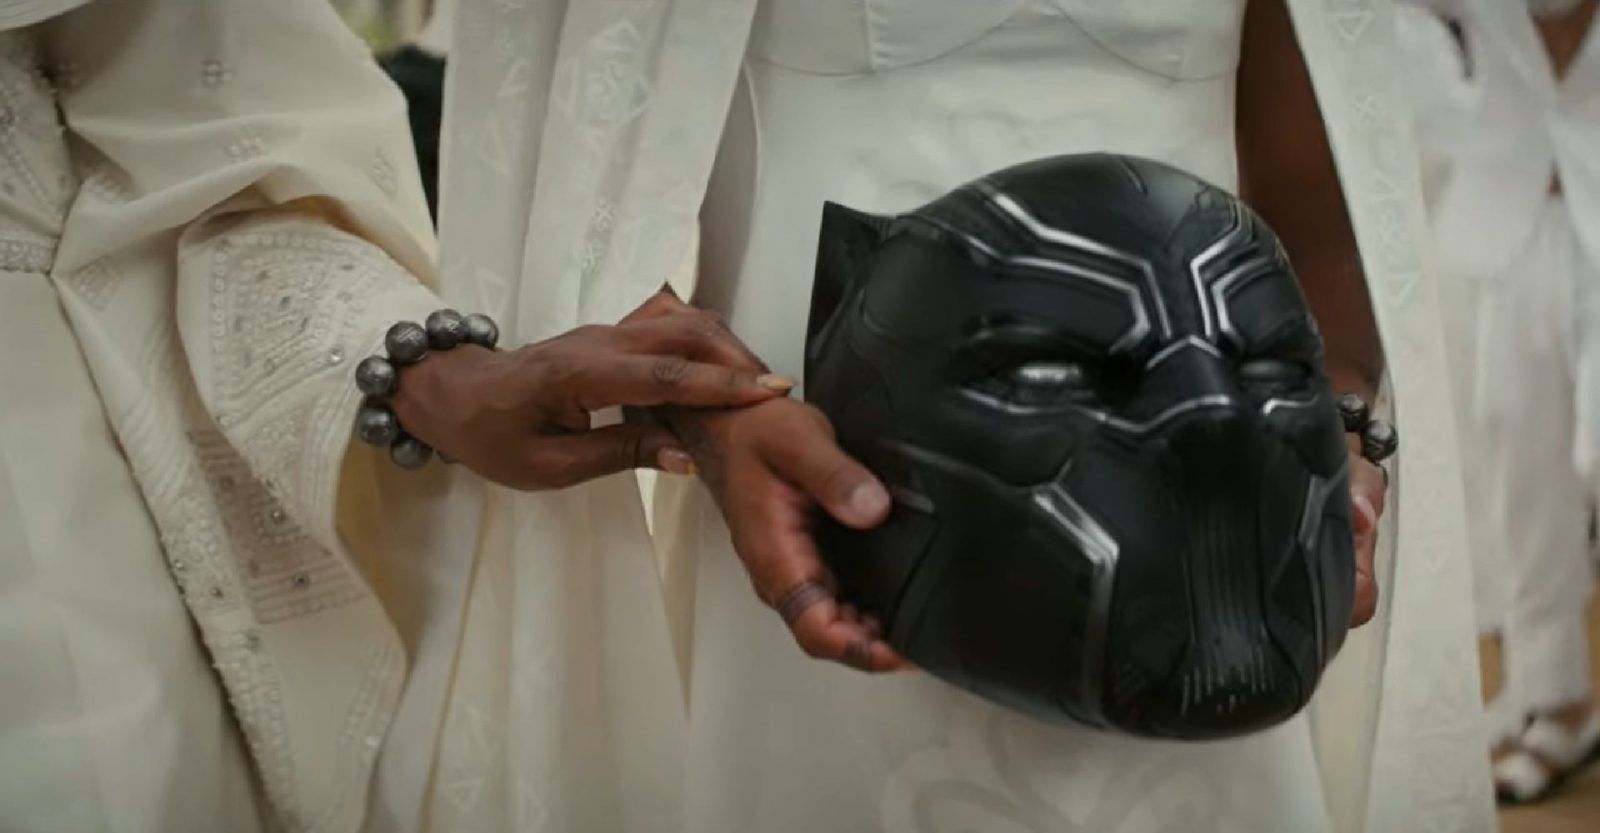 ‘Black Panther: Wakanda Forever’ trailer hints at new Black Panther taking charge